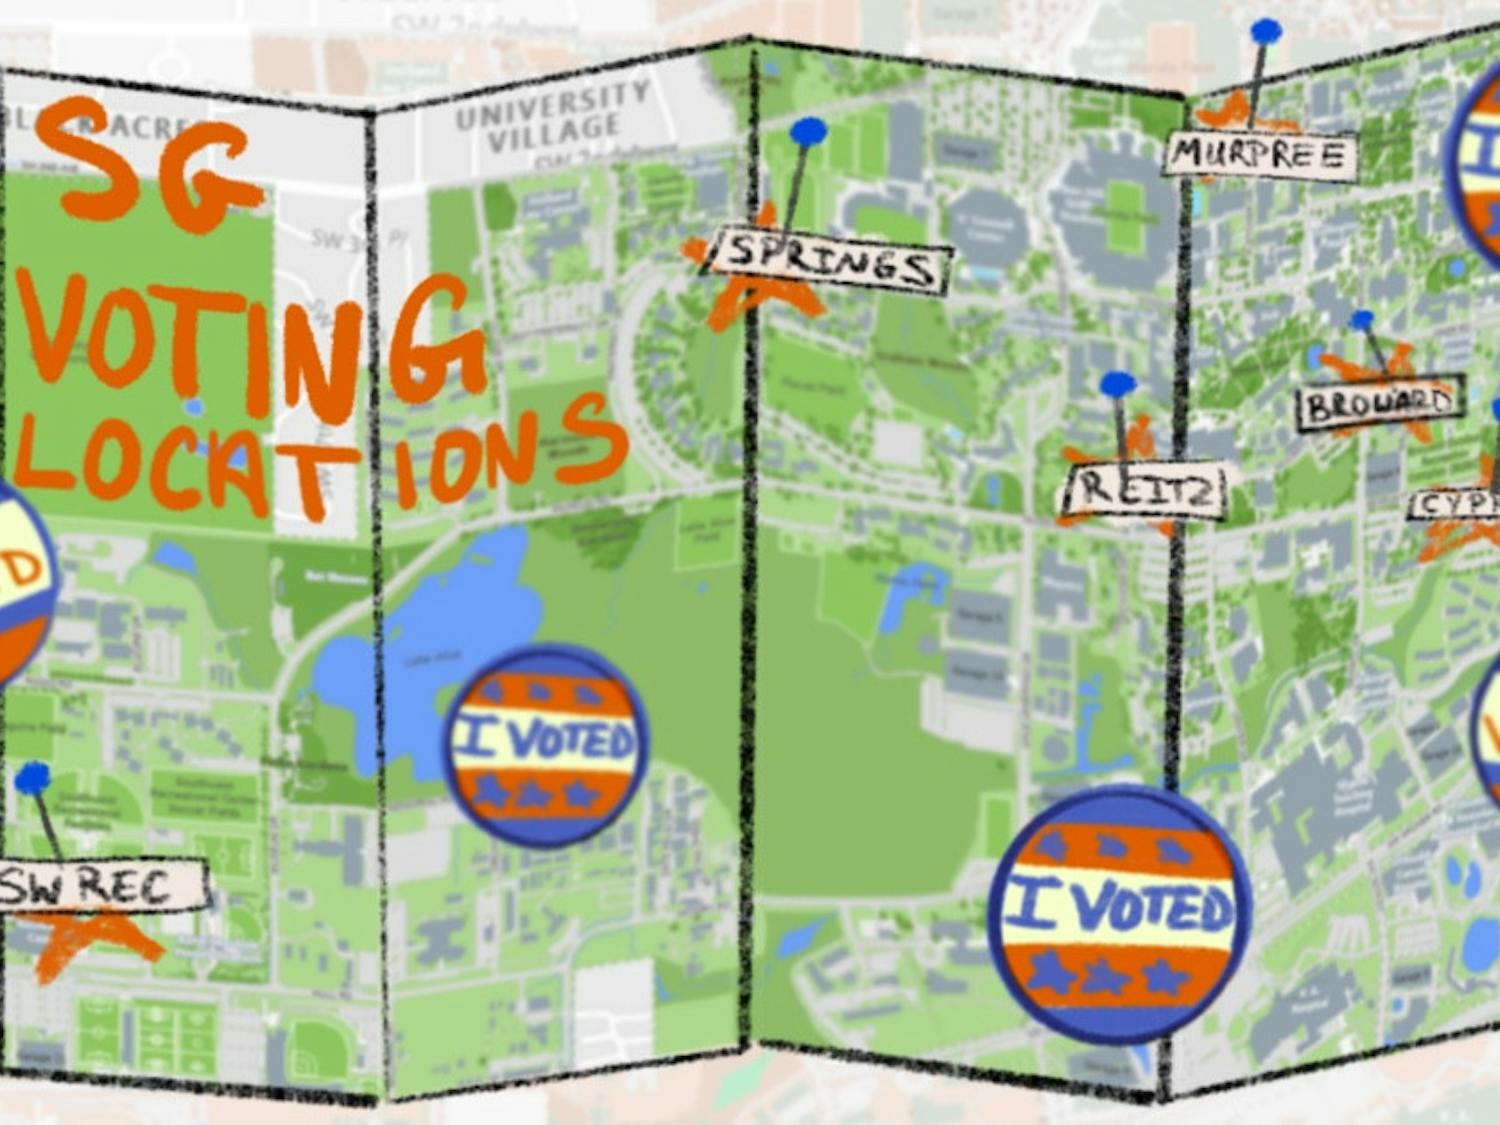 Spring 2021 Student Government Polling Locations